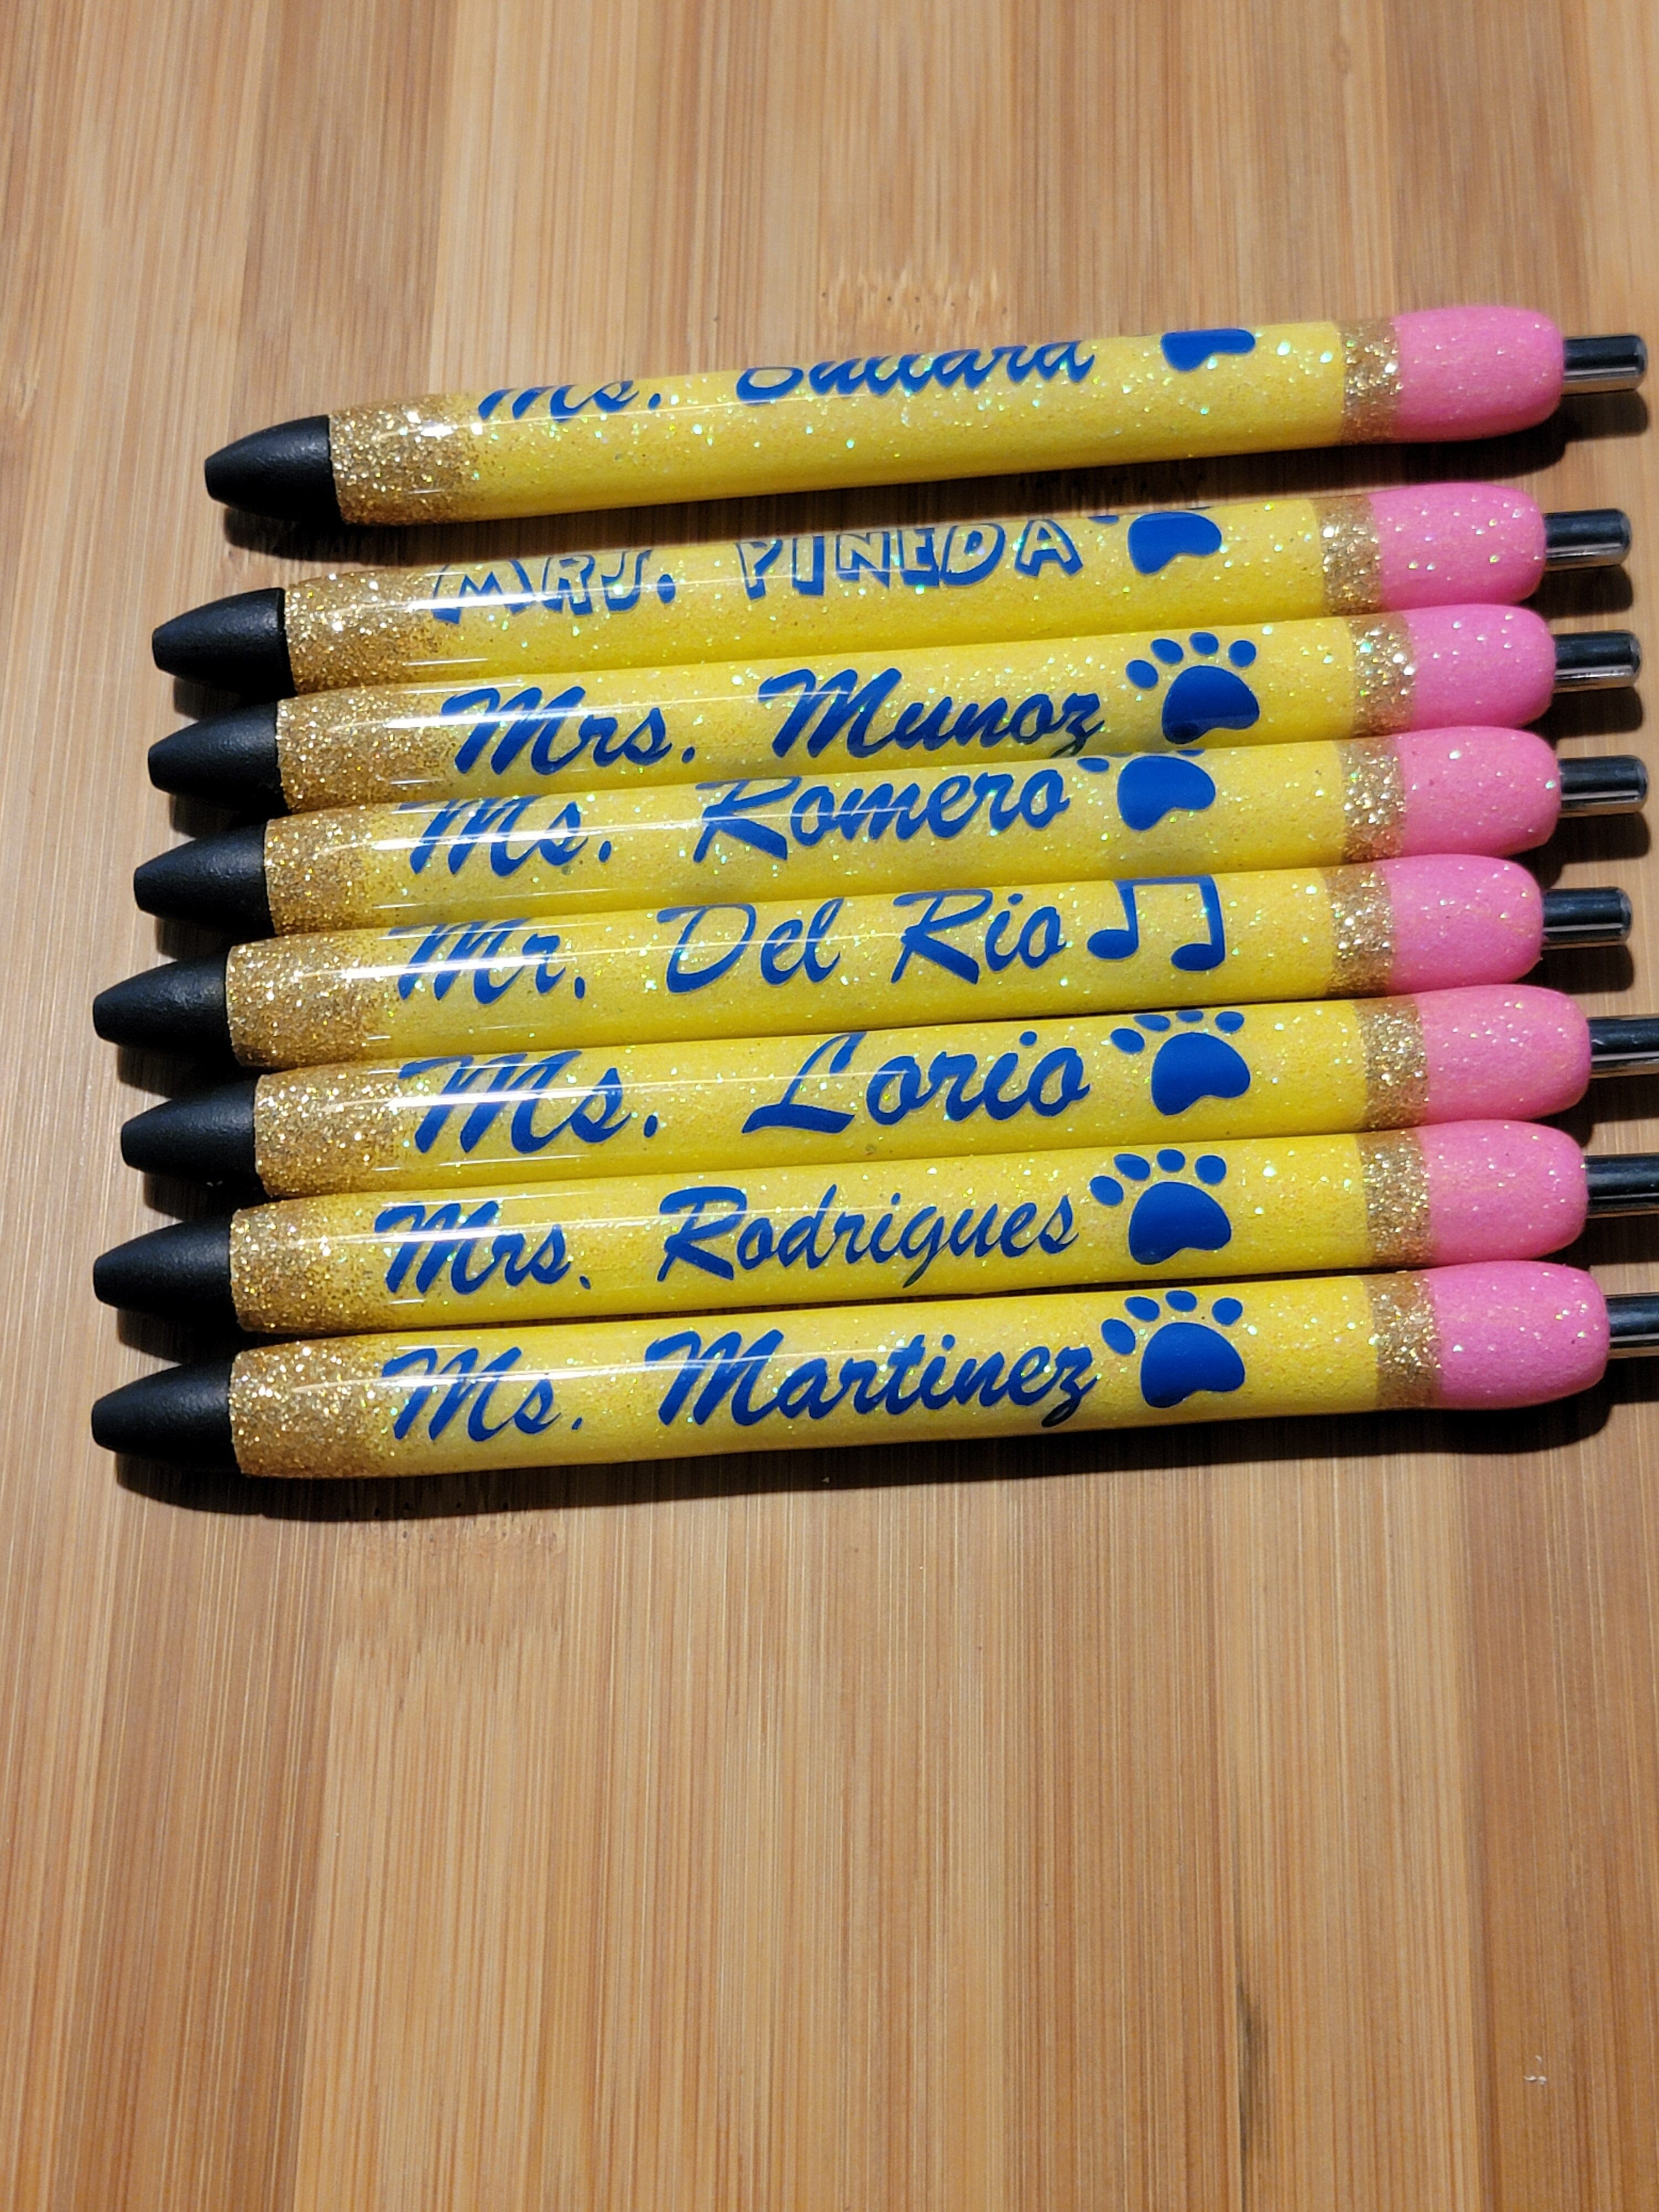 Personalized pencil pens for teacher gifts